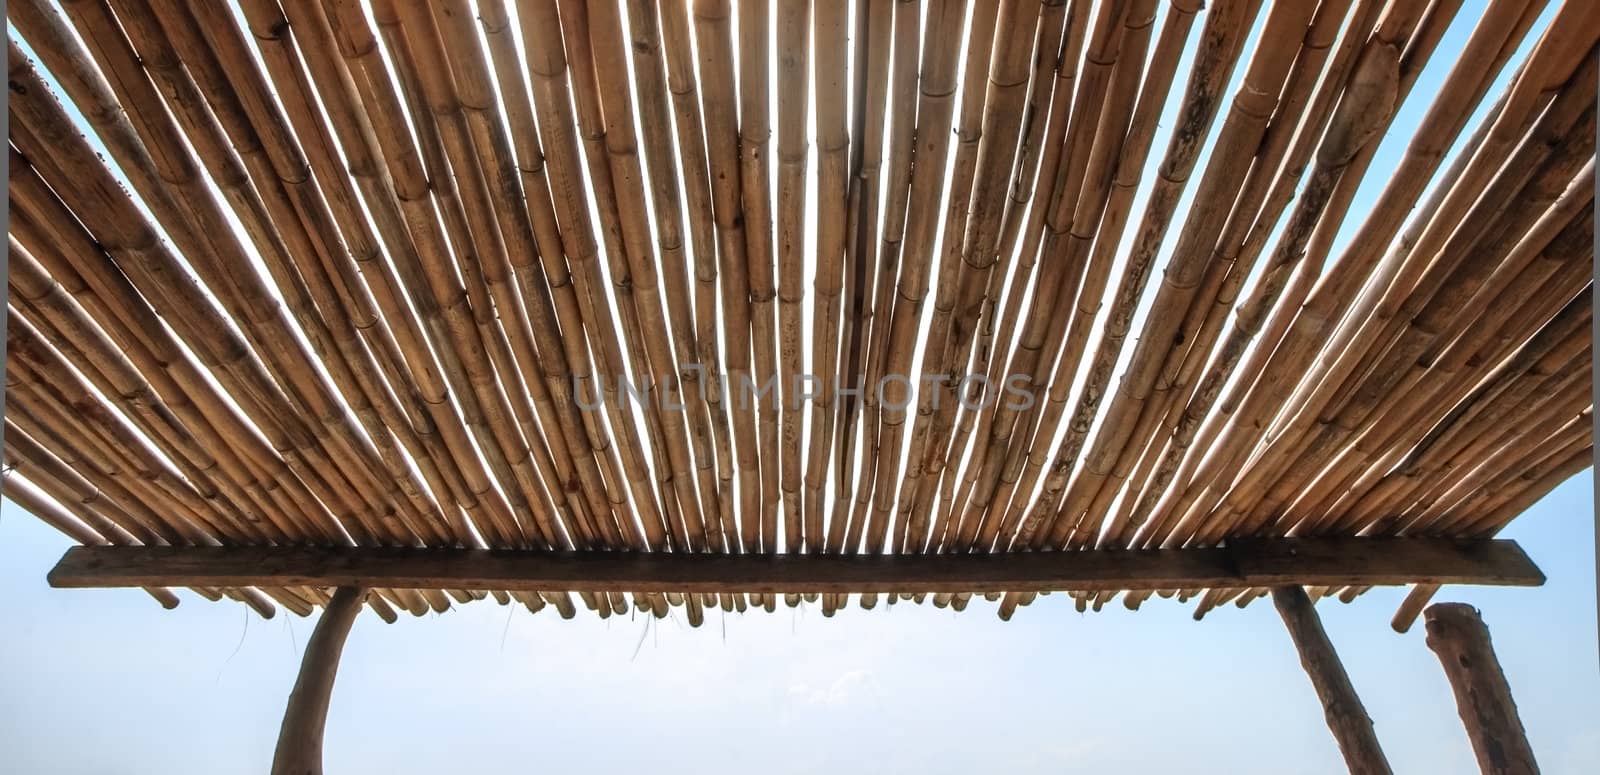 Bamboo roof